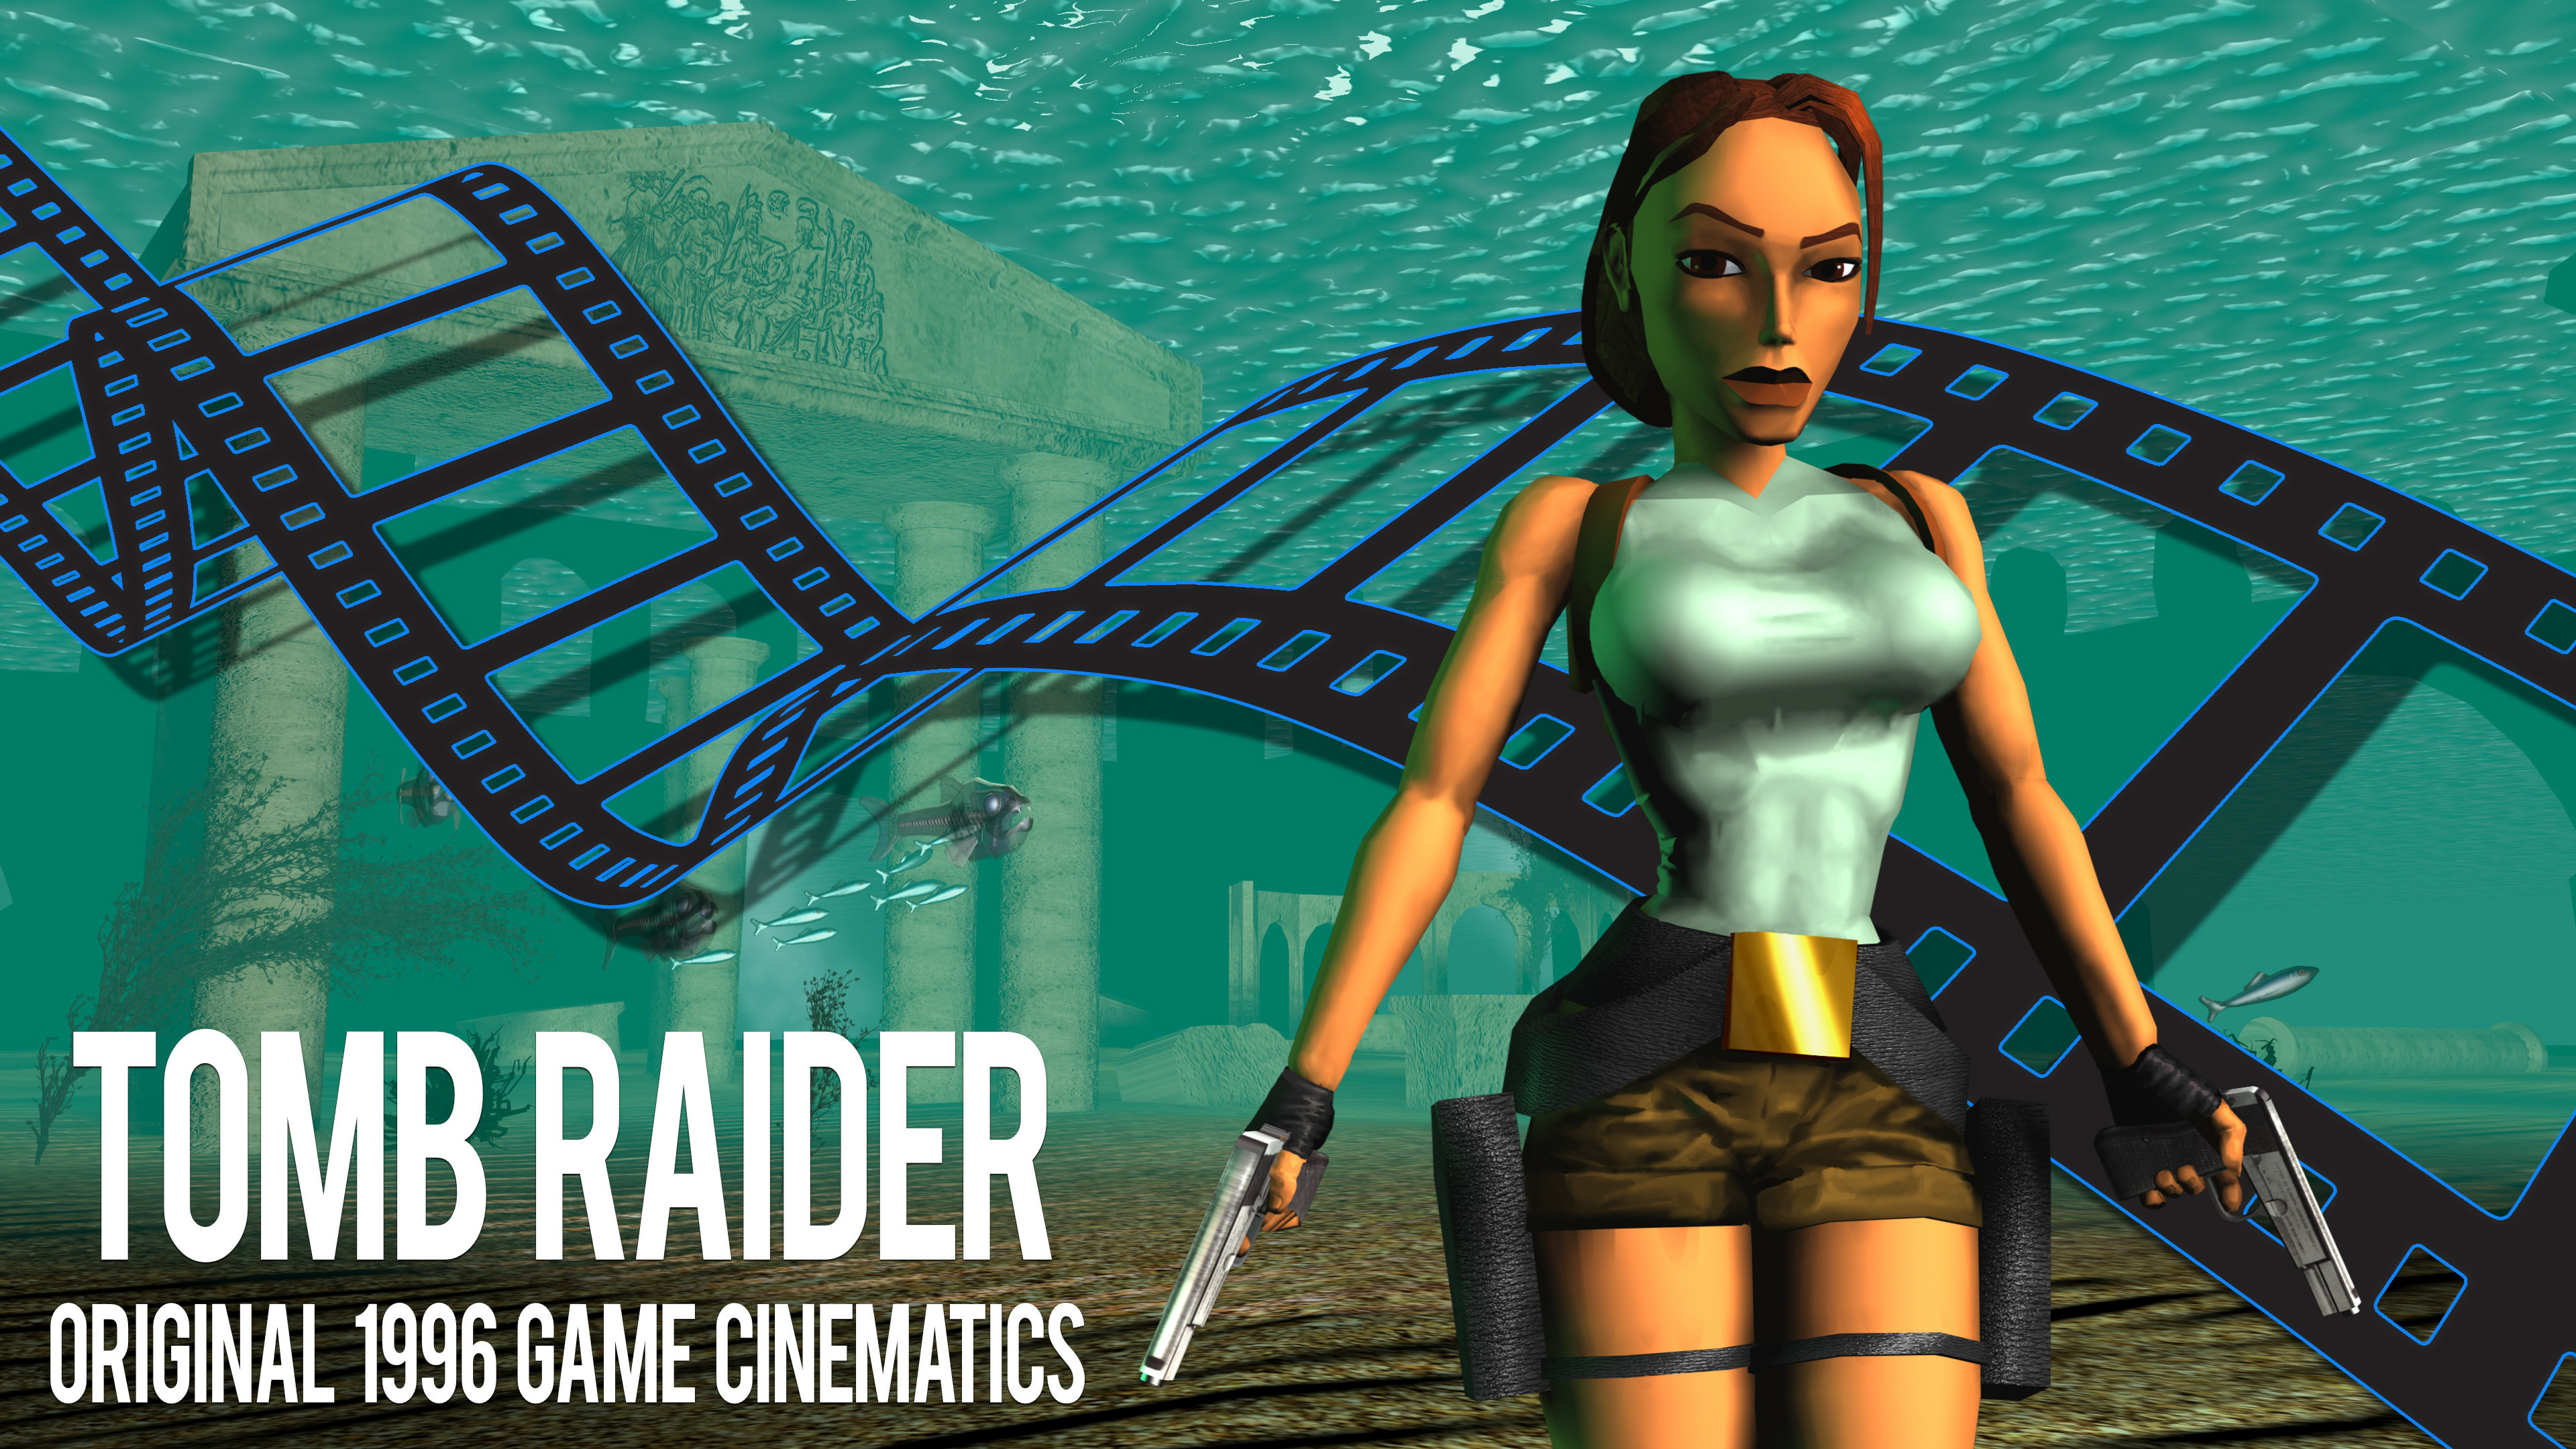 TEMPLE RAIDER free online game on